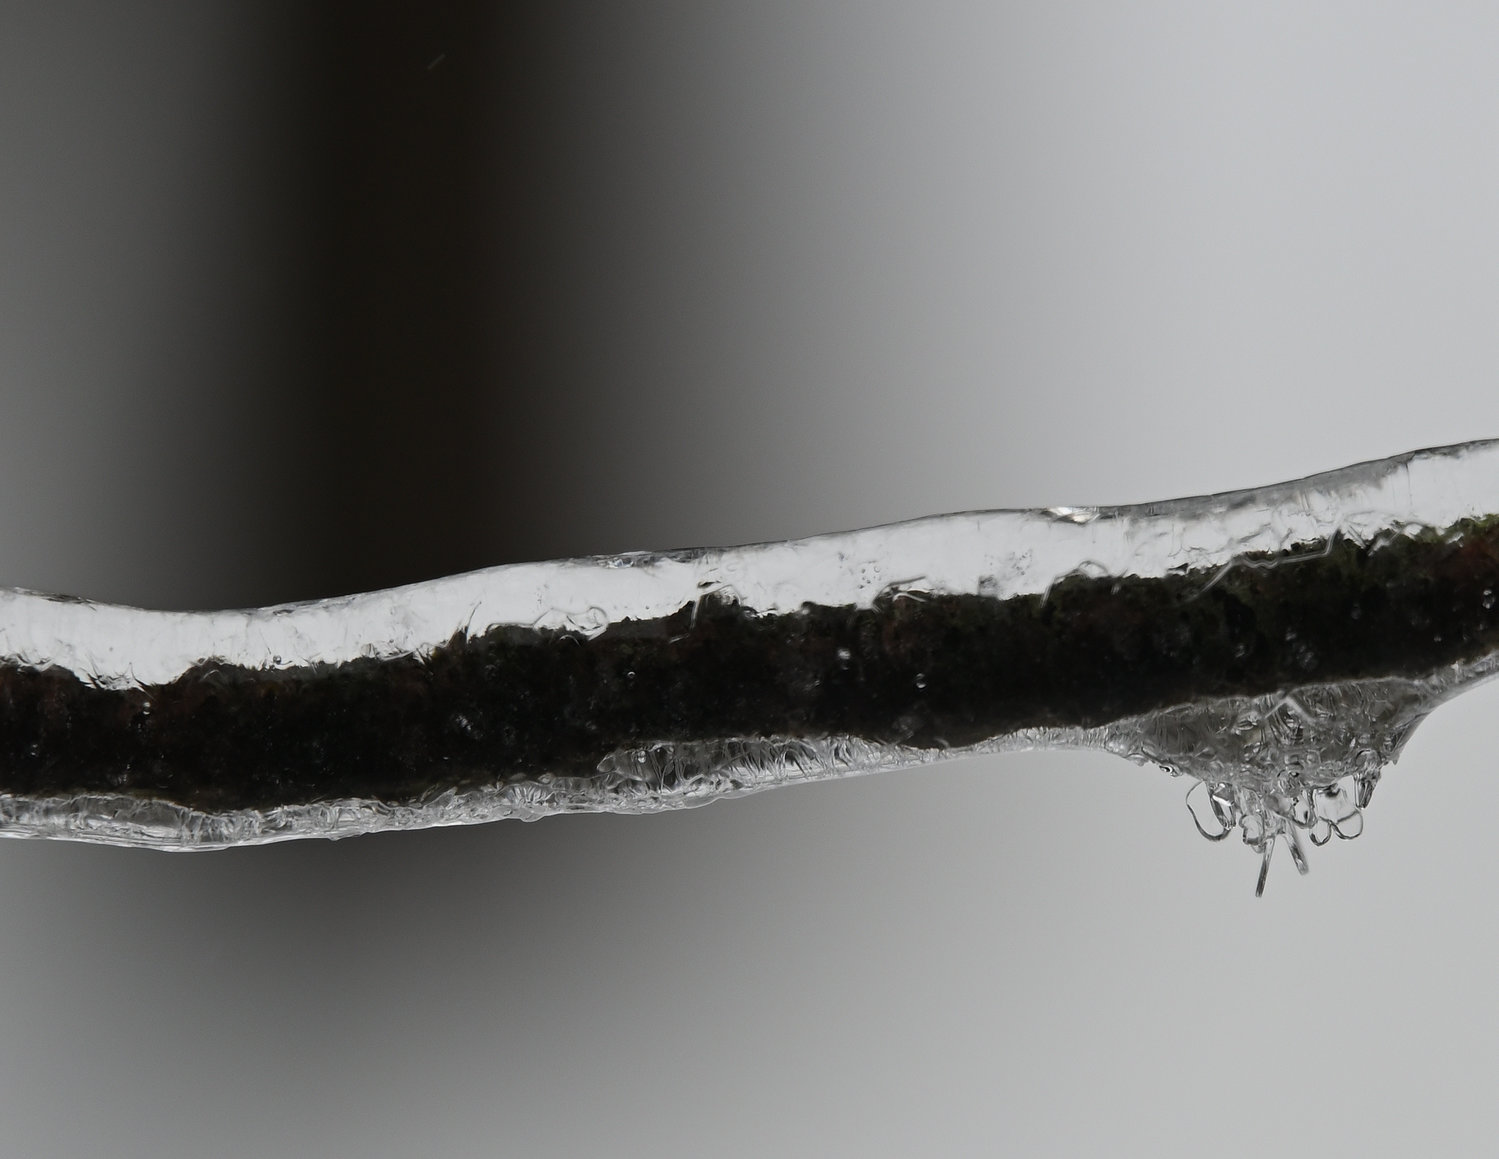 This small twig has about a quarter-inch of ice on it after the February 16 ice storm. Ice or freezing rain forms when the air is warmer in a higher altitude. Rain droplets form in the clouds, become big enough to fall, and fall into air that is below freezing. The supercooled droplets freeze almost instantly after contact with the ground, or this twig.